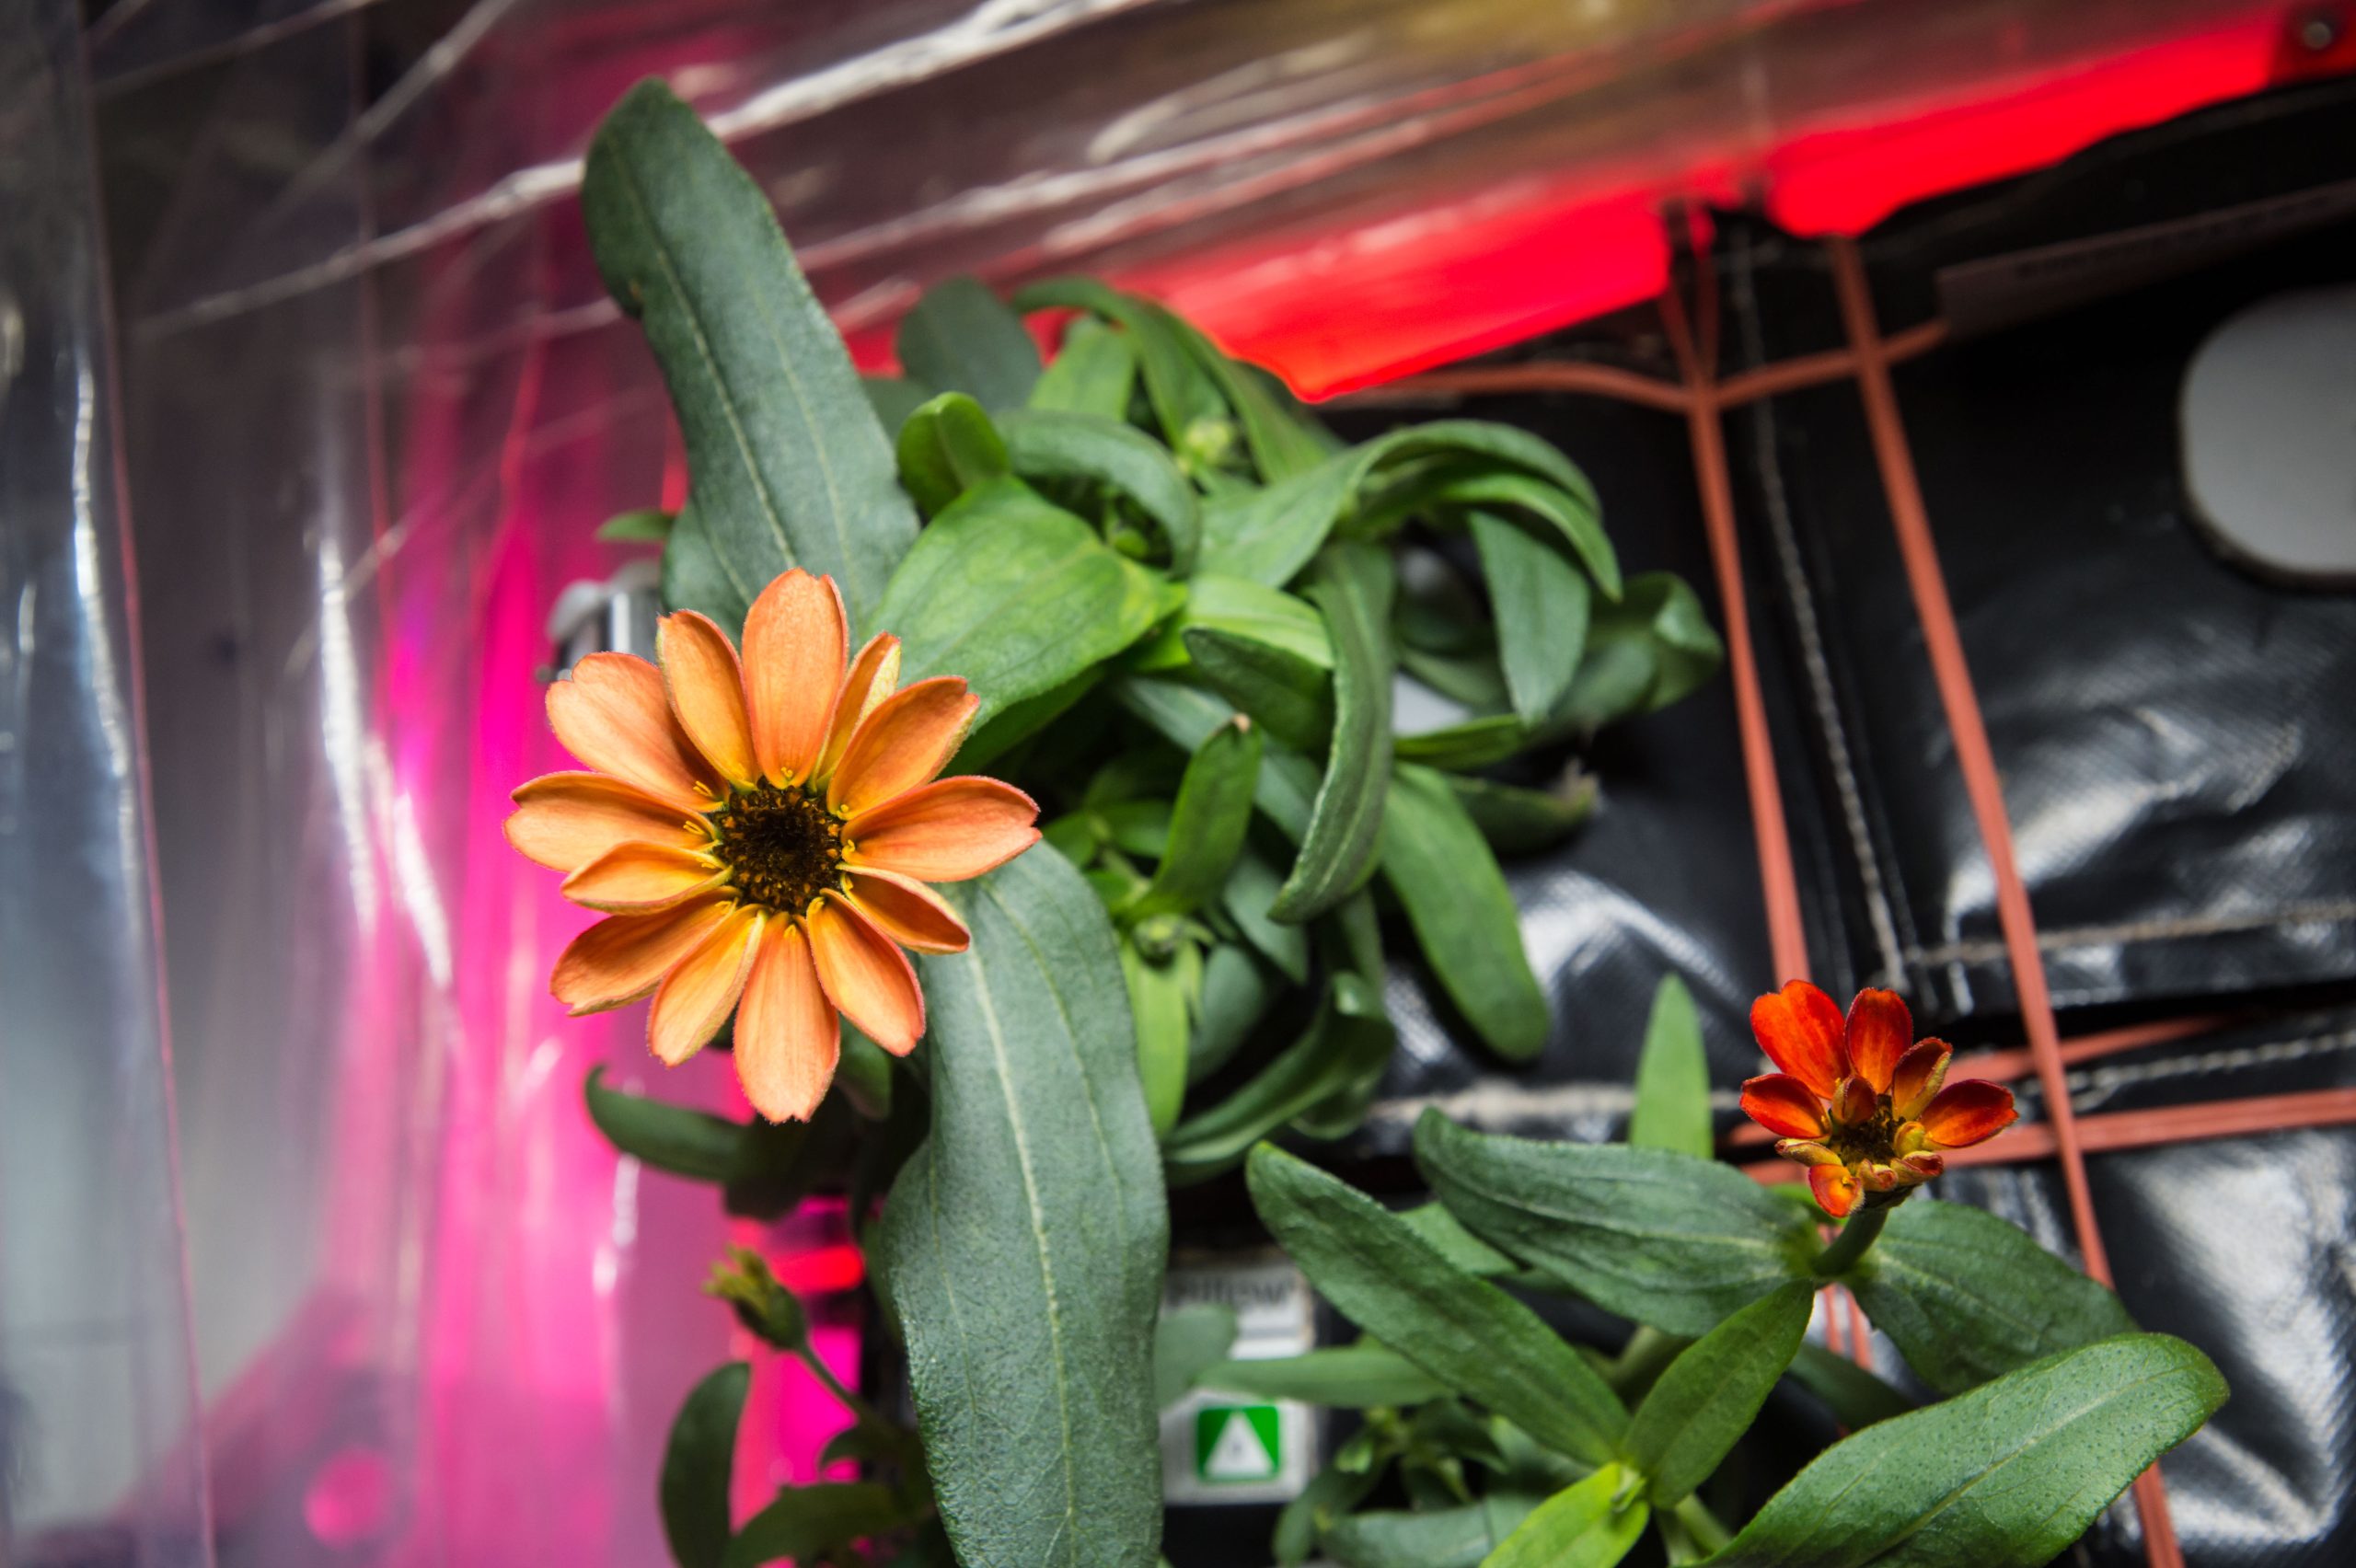 Space Flower Breakthrough! See the First Flower Grown on the ISS in Stunning NASA Image 10